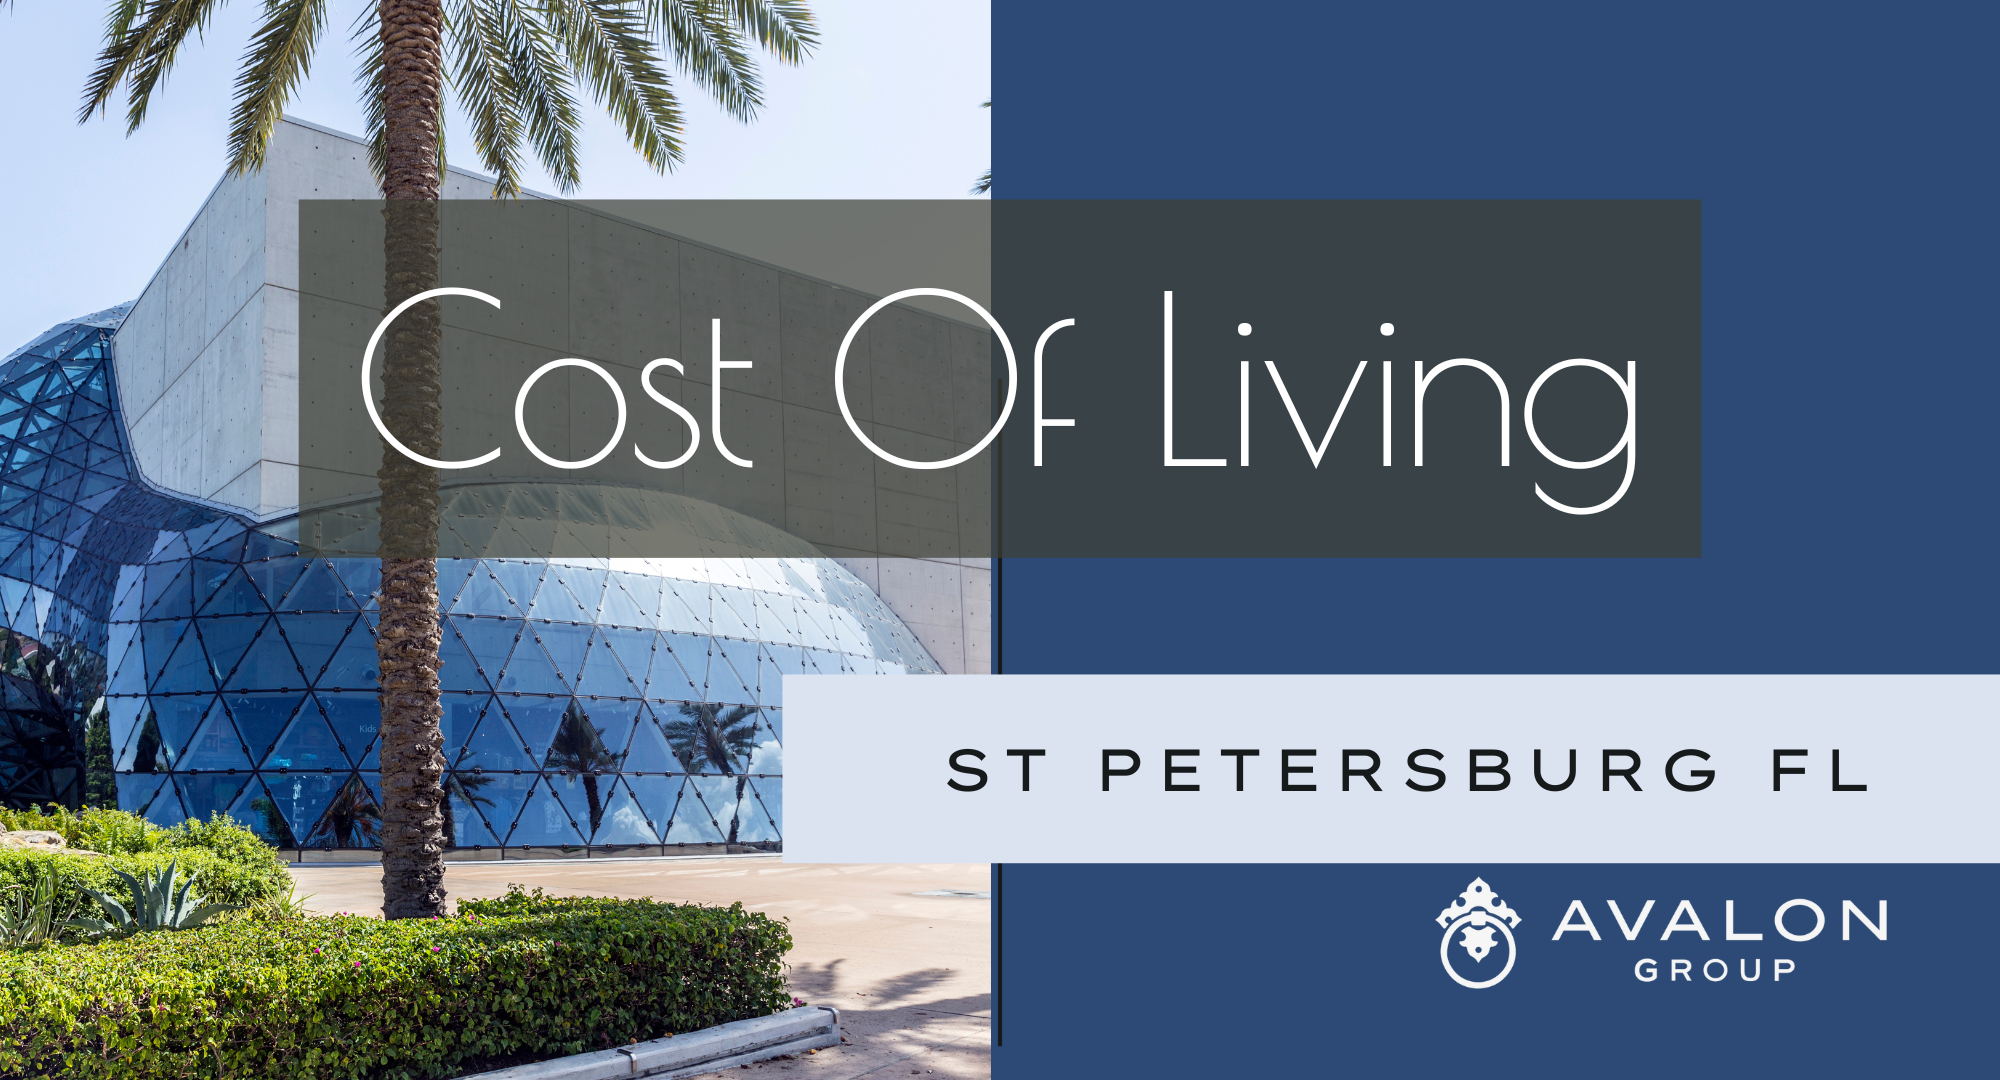 Cost of Living St Petersburg Florida is written on this title picture. There is a picture of the rounded glass section of the Dali Museum in the background.